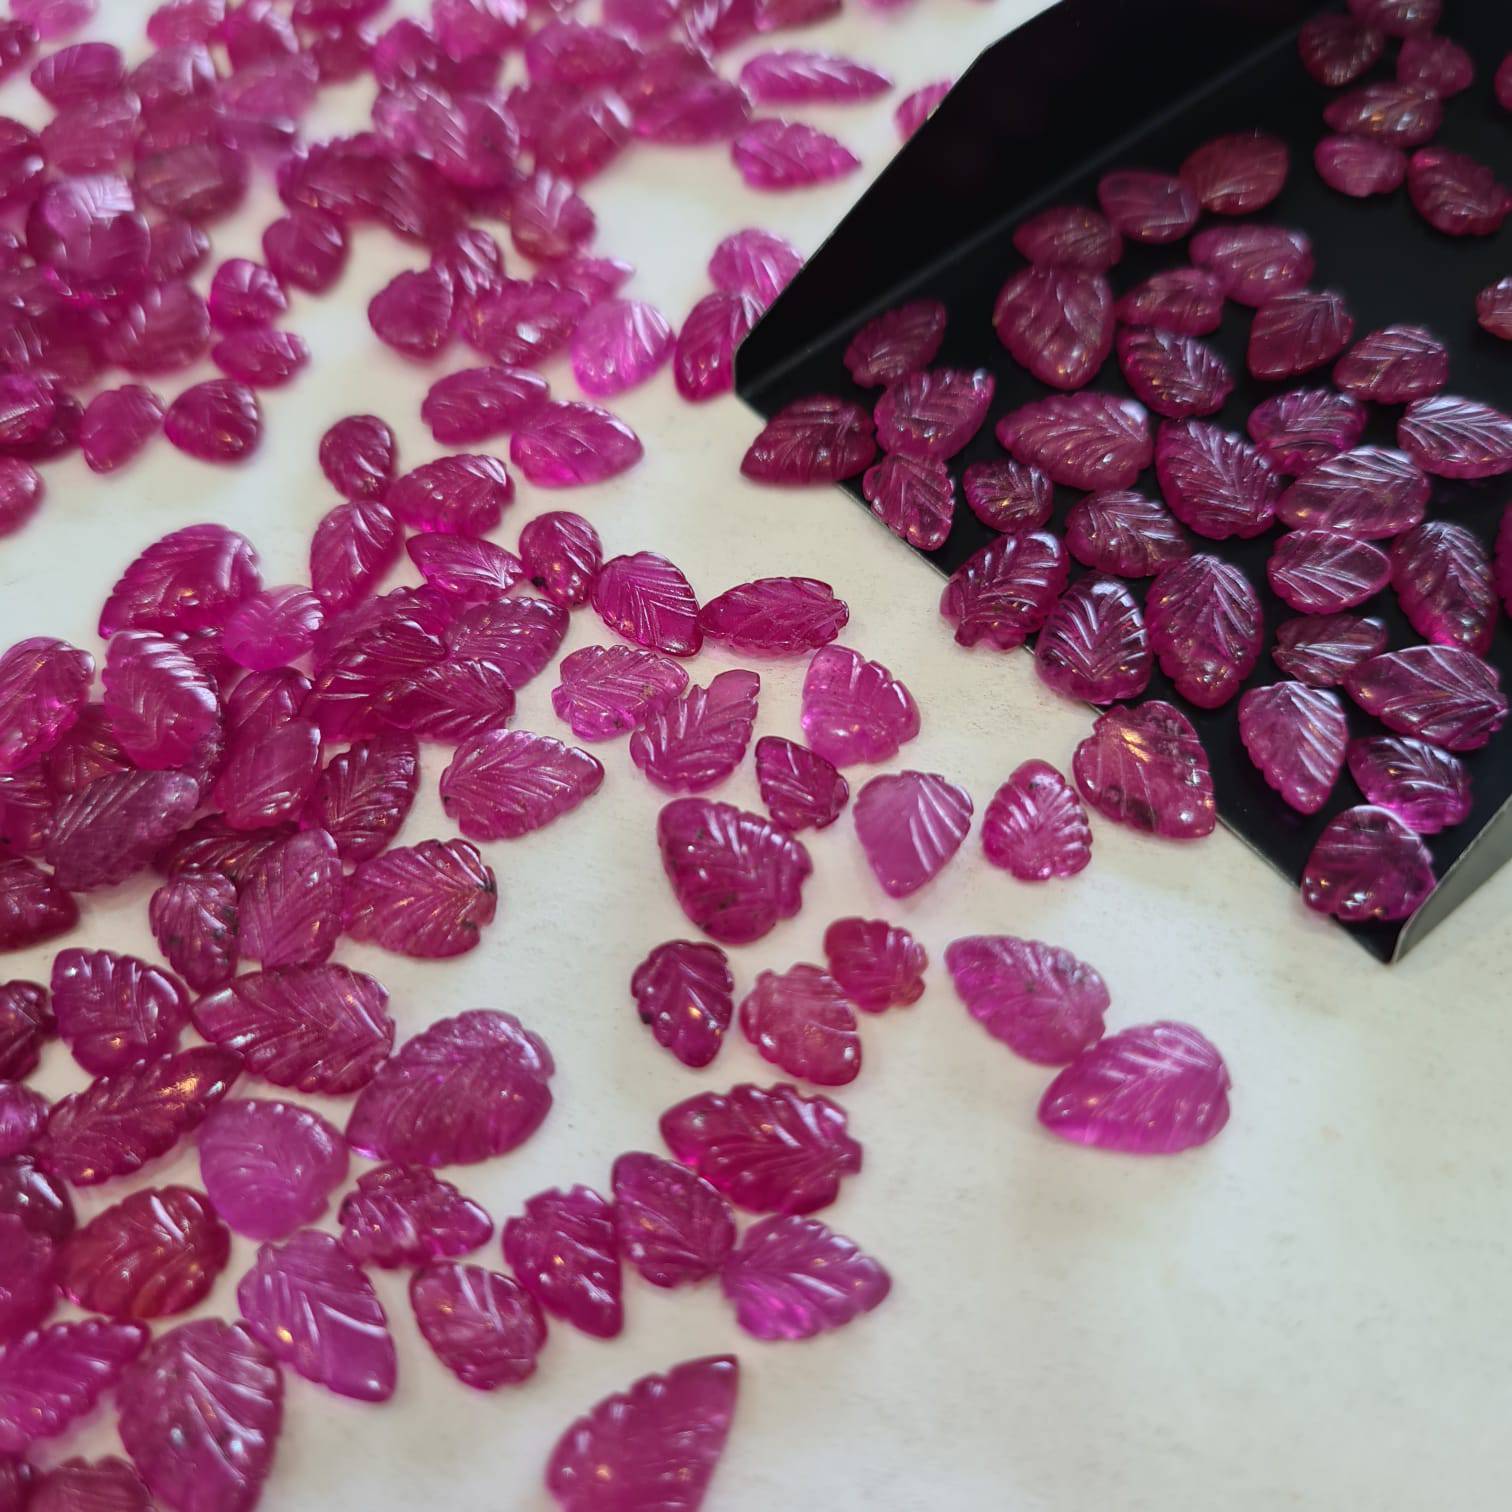 10 Pcs Natural Ruby Carved Leads Big Sizes 8-10mm Ovals African Mined - The LabradoriteKing